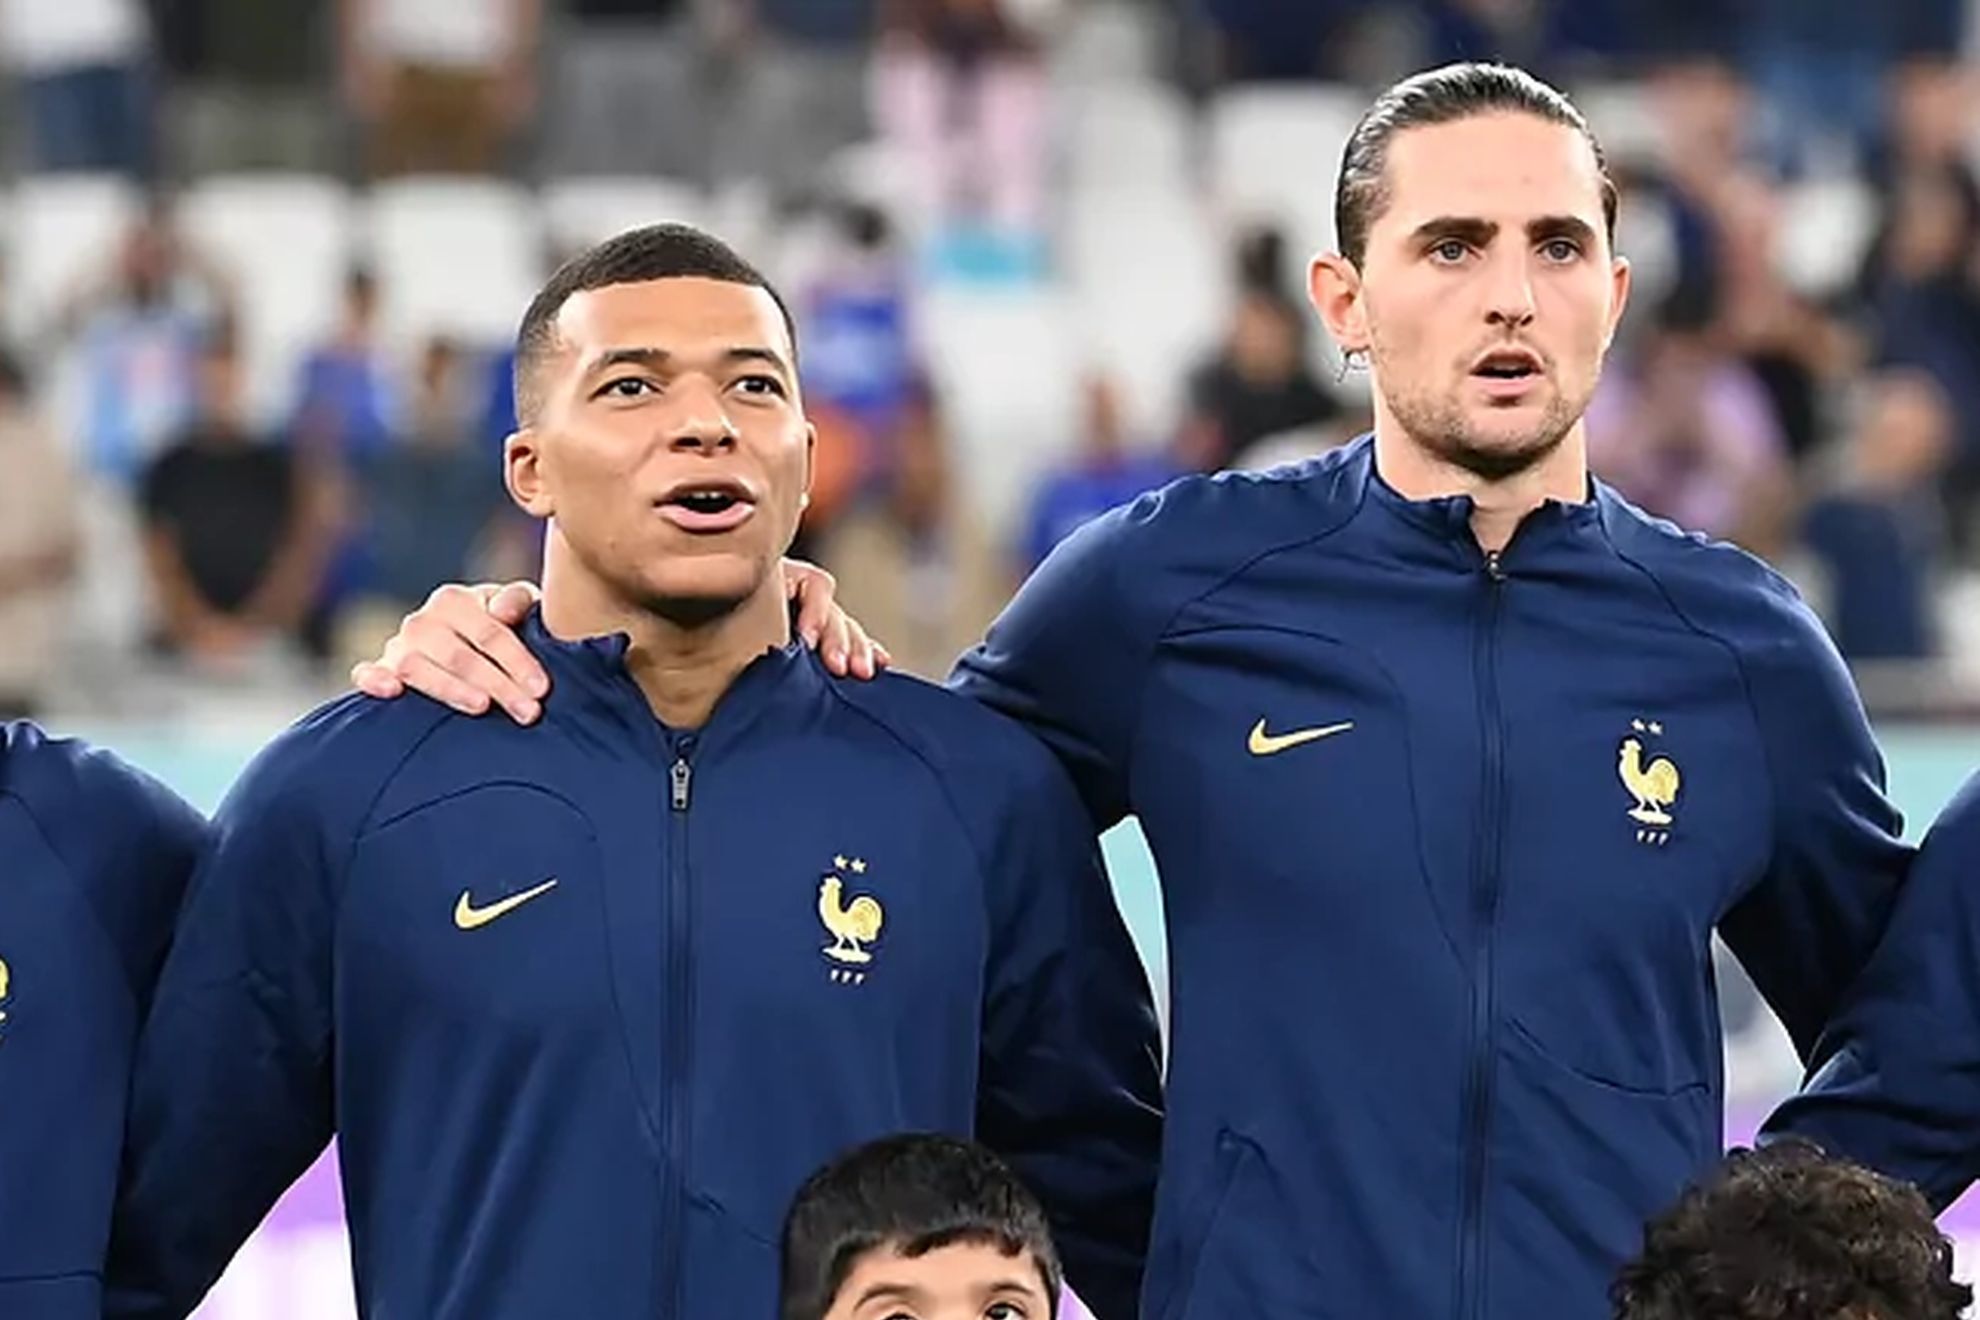 Adrien Rabiot and Kylian Mbappe